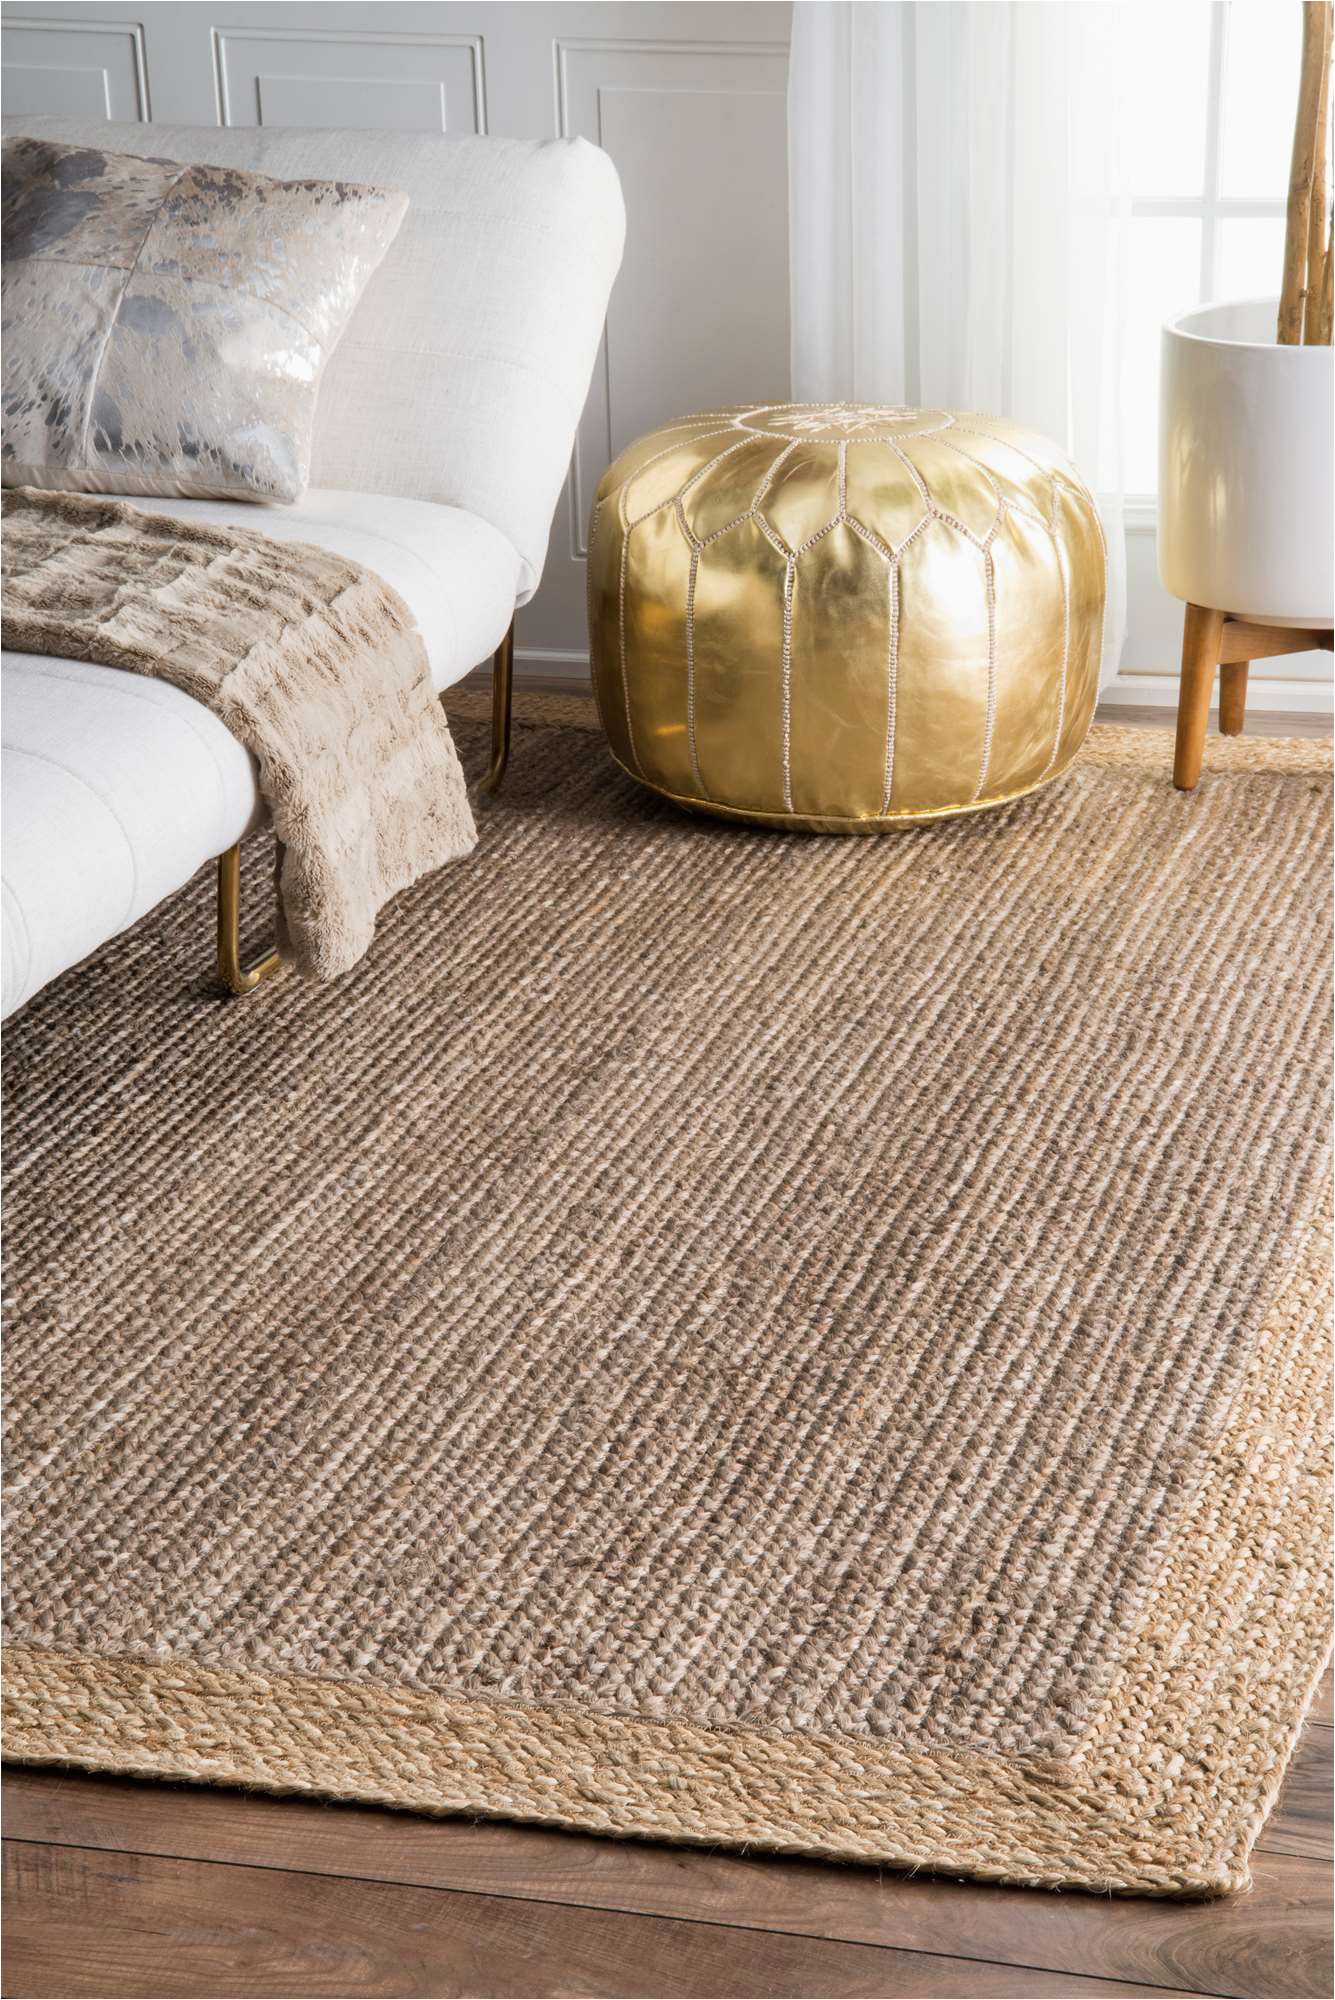 8 by 10 area Rugs Cheap 10 Natural Fiber 8×10 Jute & Seagrass Rugs Under $300